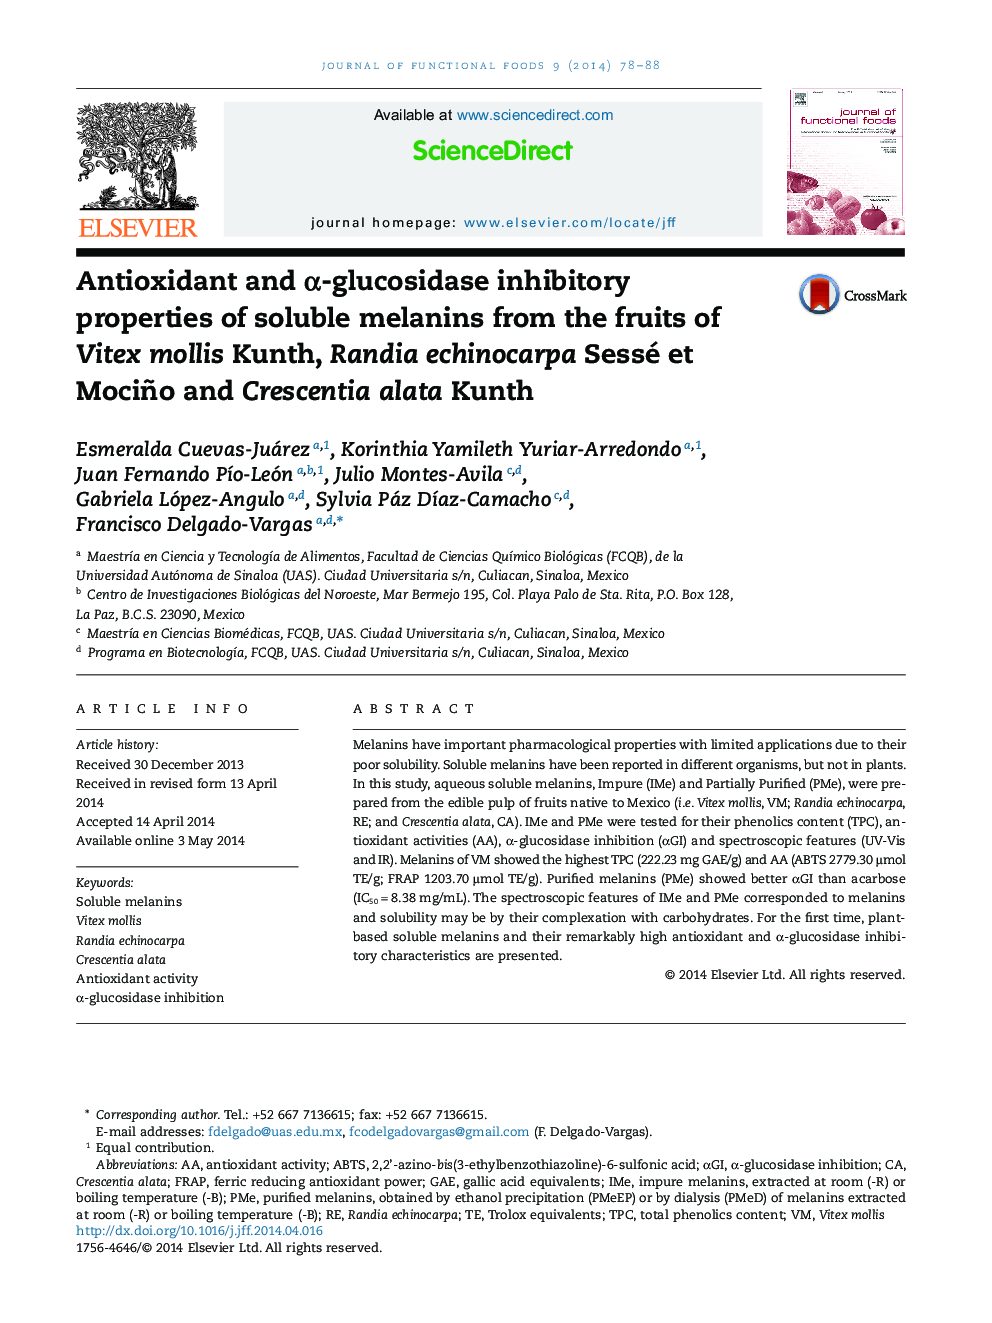 Antioxidant and α-glucosidase inhibitory properties of soluble melanins from the fruits of Vitex mollis Kunth, Randia echinocarpa Sessé et Mociño and Crescentia alata Kunth